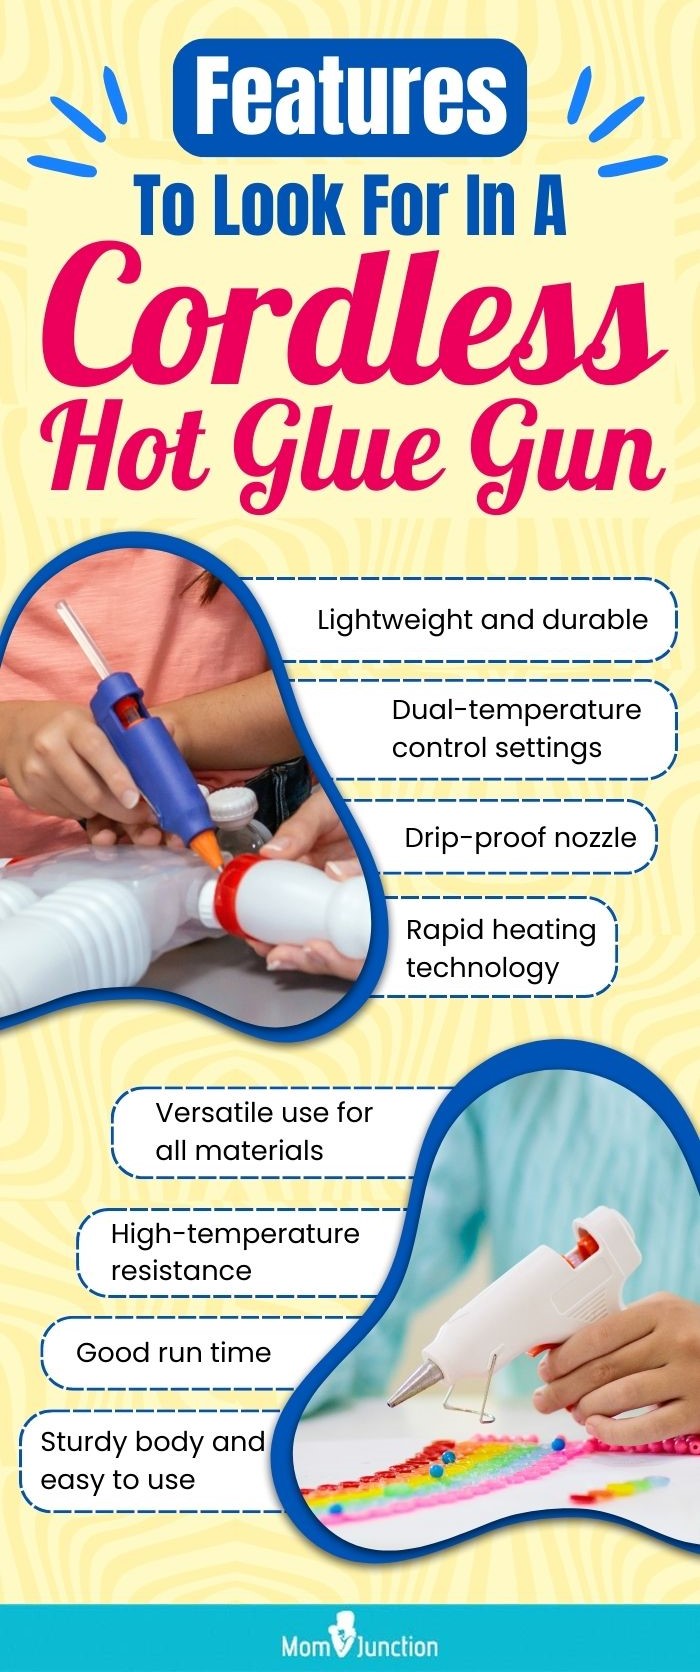 Features To Look For In A Cordless Hot Glue Gun (infographic)